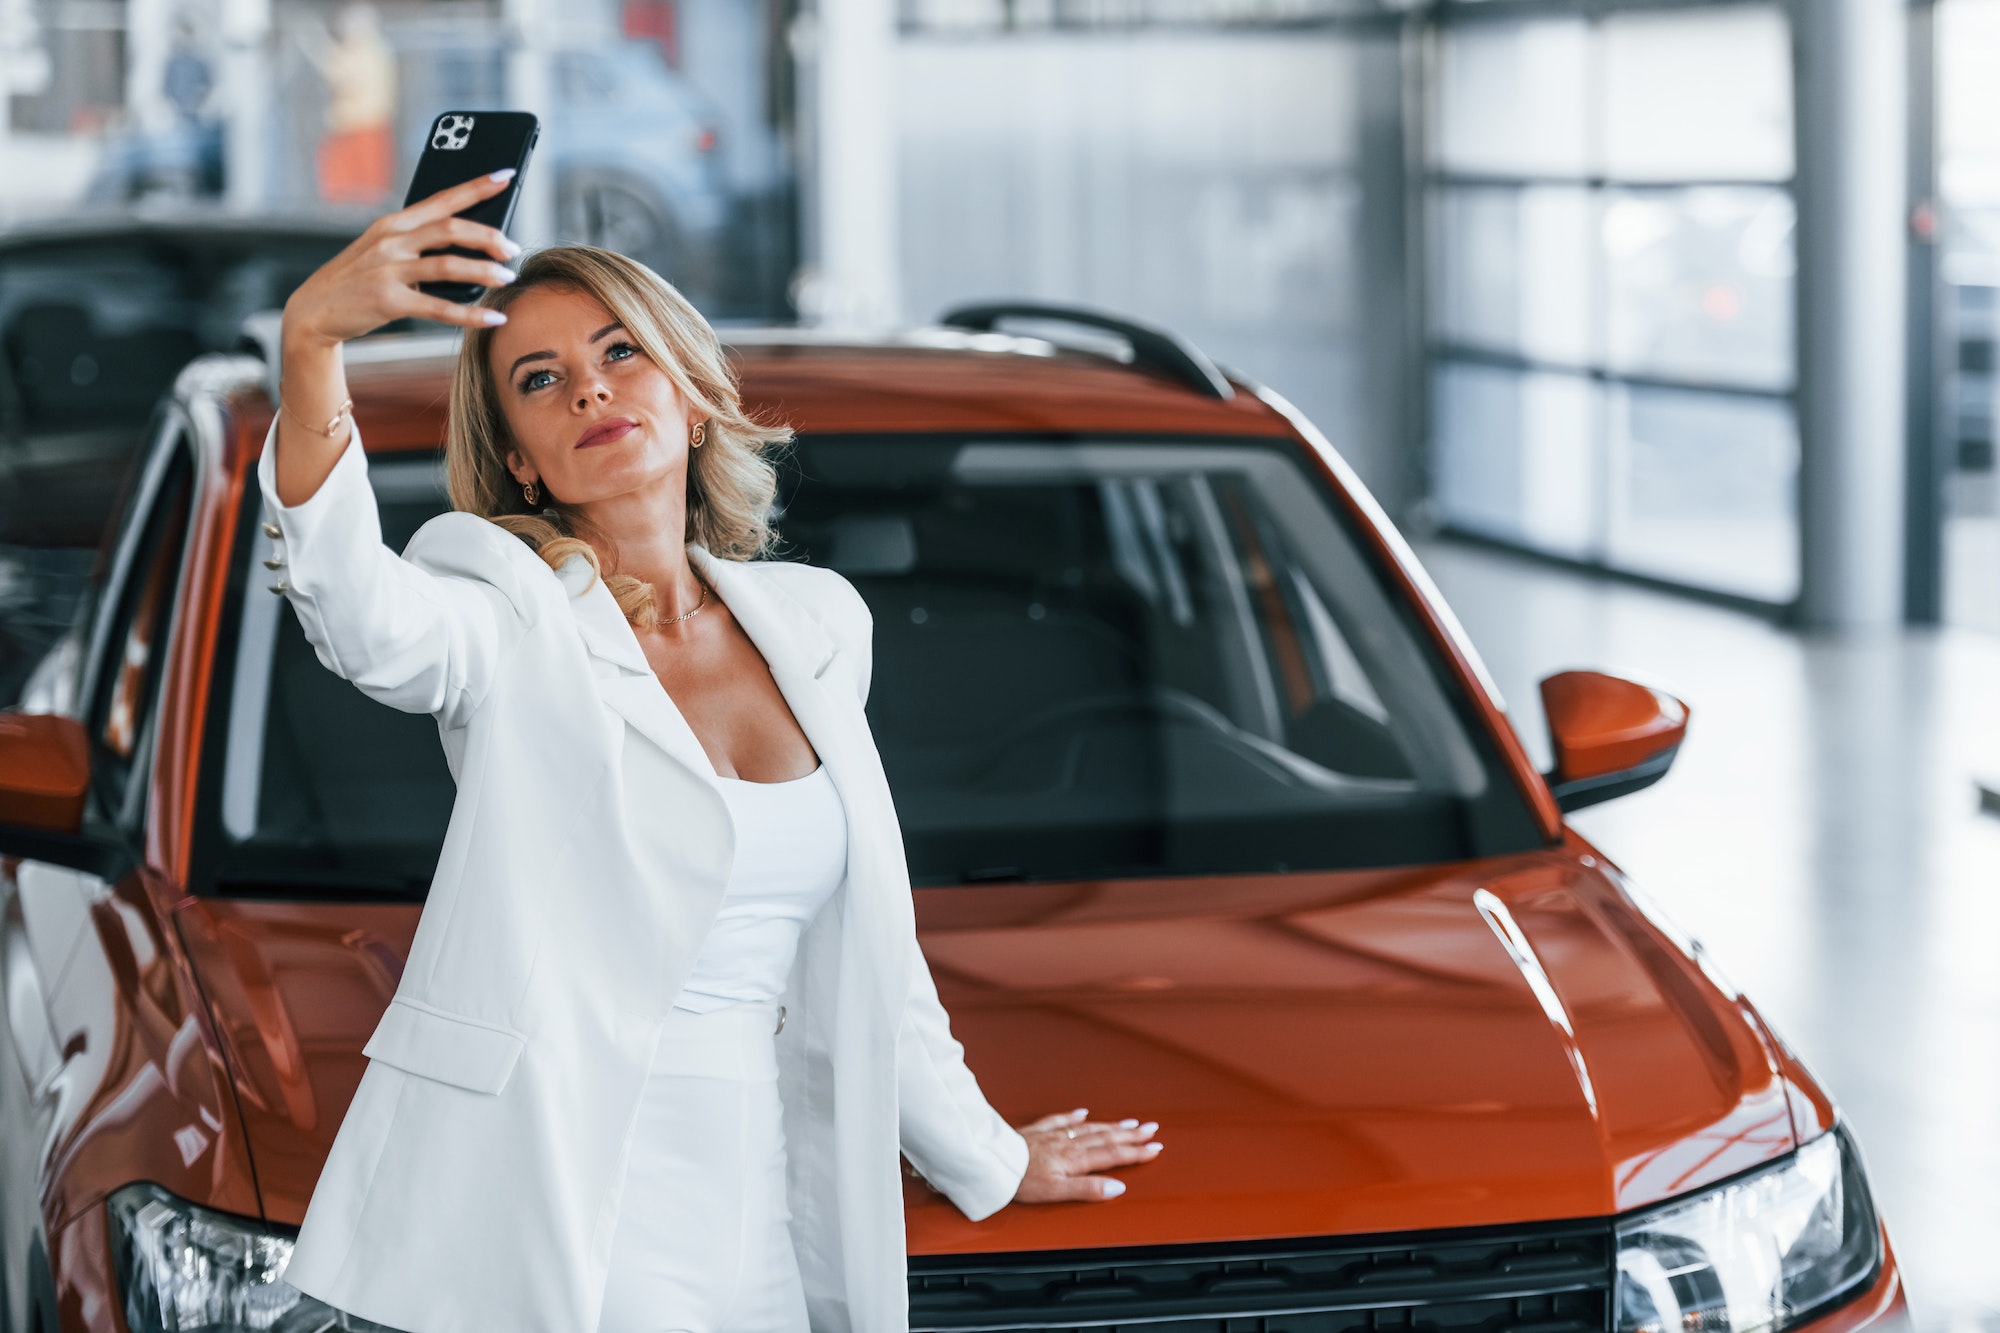 Making selfie. Woman in formal clothes is indoors in the autosalon